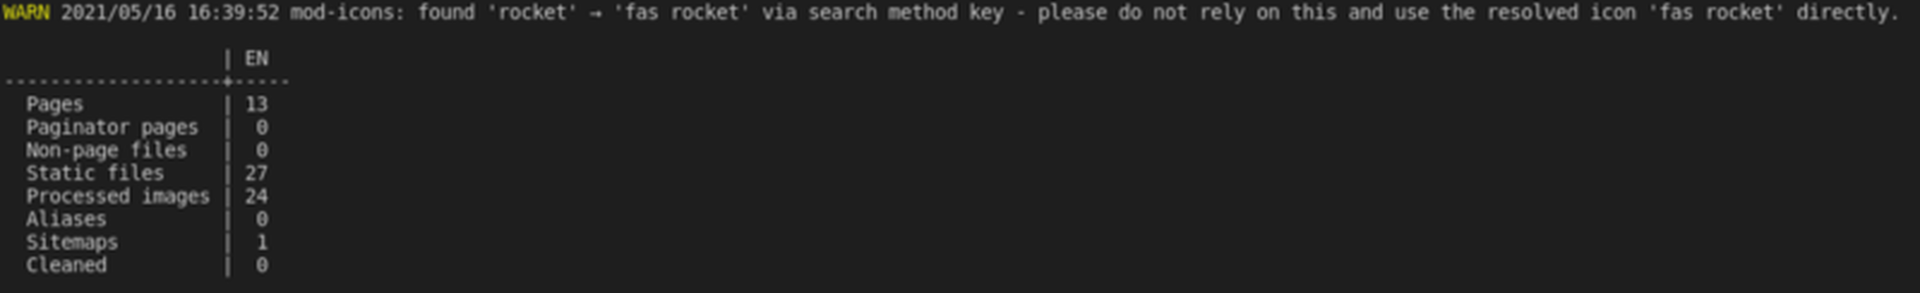 search function shown in terminal